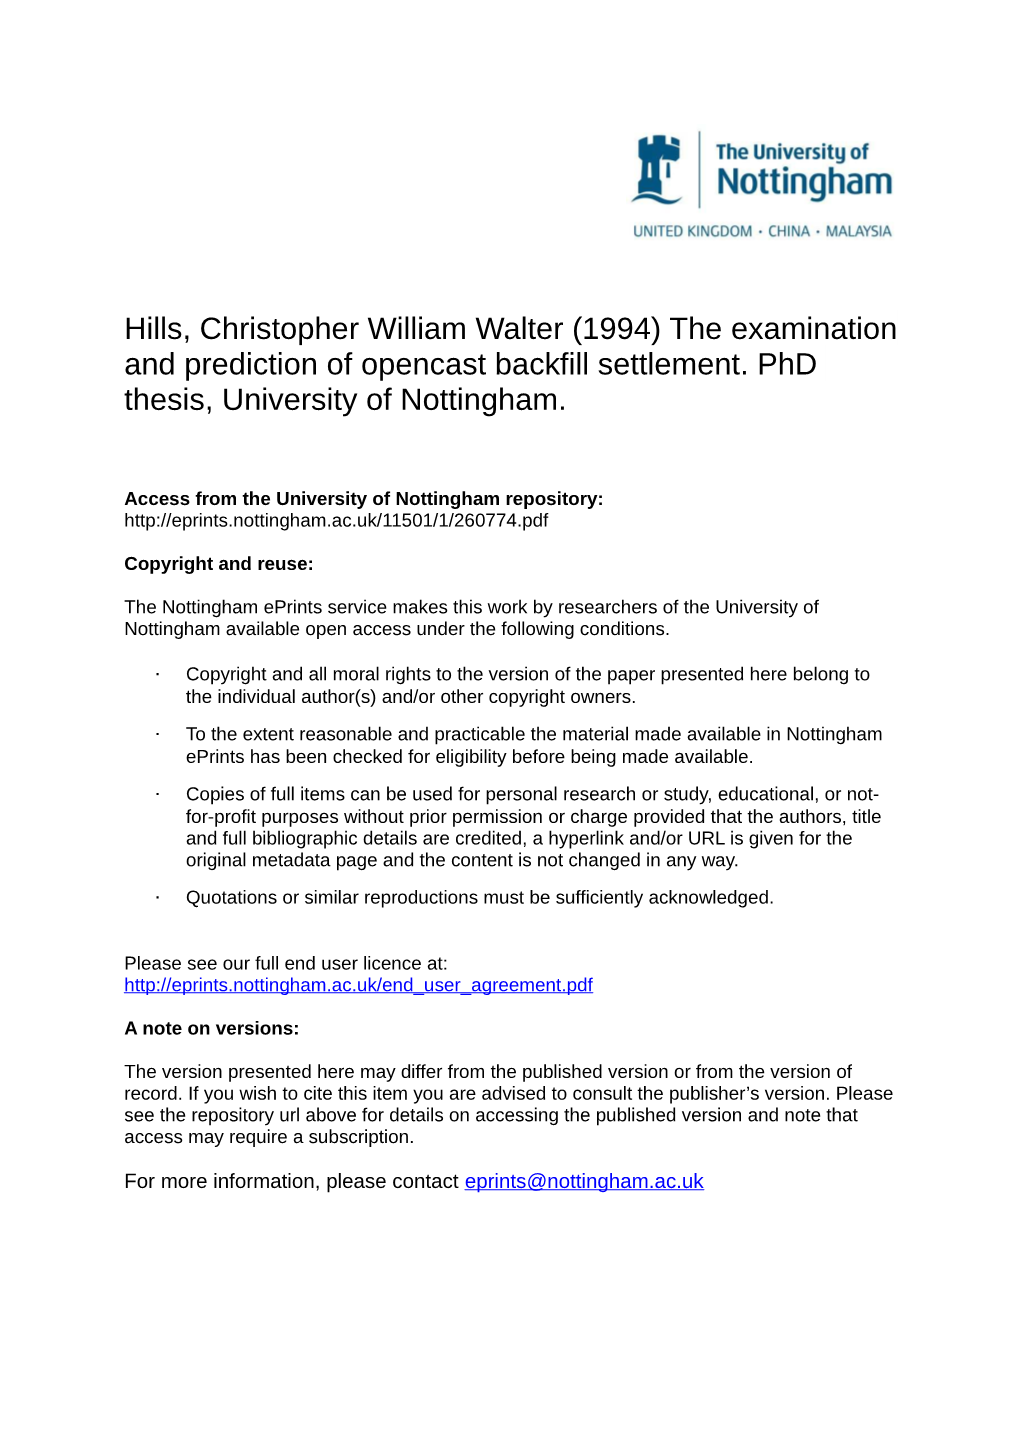 Hills, Christopher William Walter (1994) the Examination and Prediction of Opencast Backfill Settlement. Phd Thesis, University of Nottingham